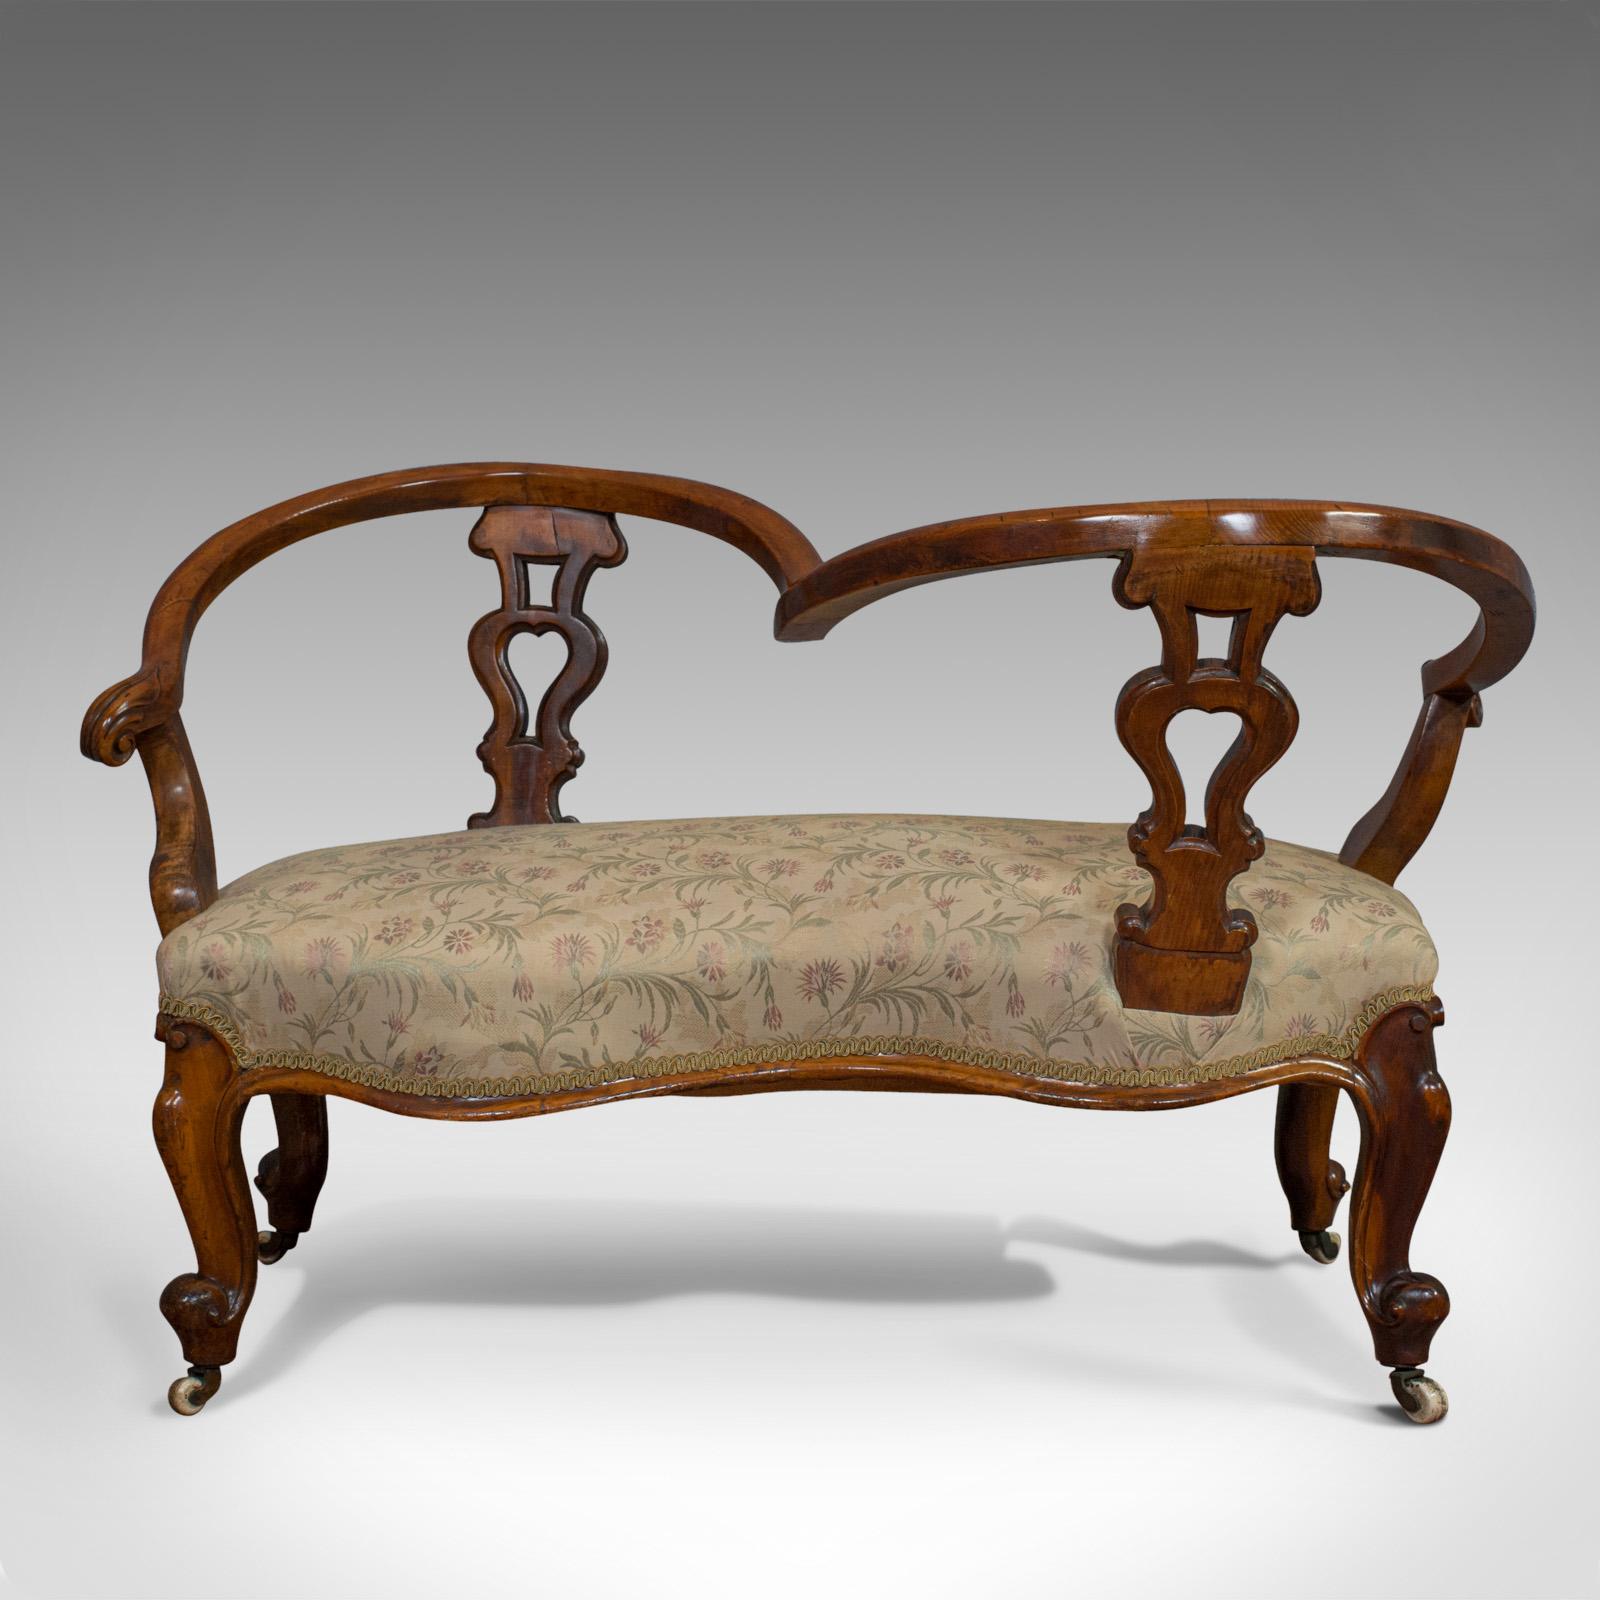 This is an antique conversation sofa. A English, fruitwood loveseat, tête-à-tête or courting bench, dating to the early Victorian period, circa 1840.

Sinuous, lustrous and perfect for the loquacious
Displays a desirable aged patina
Serpentine